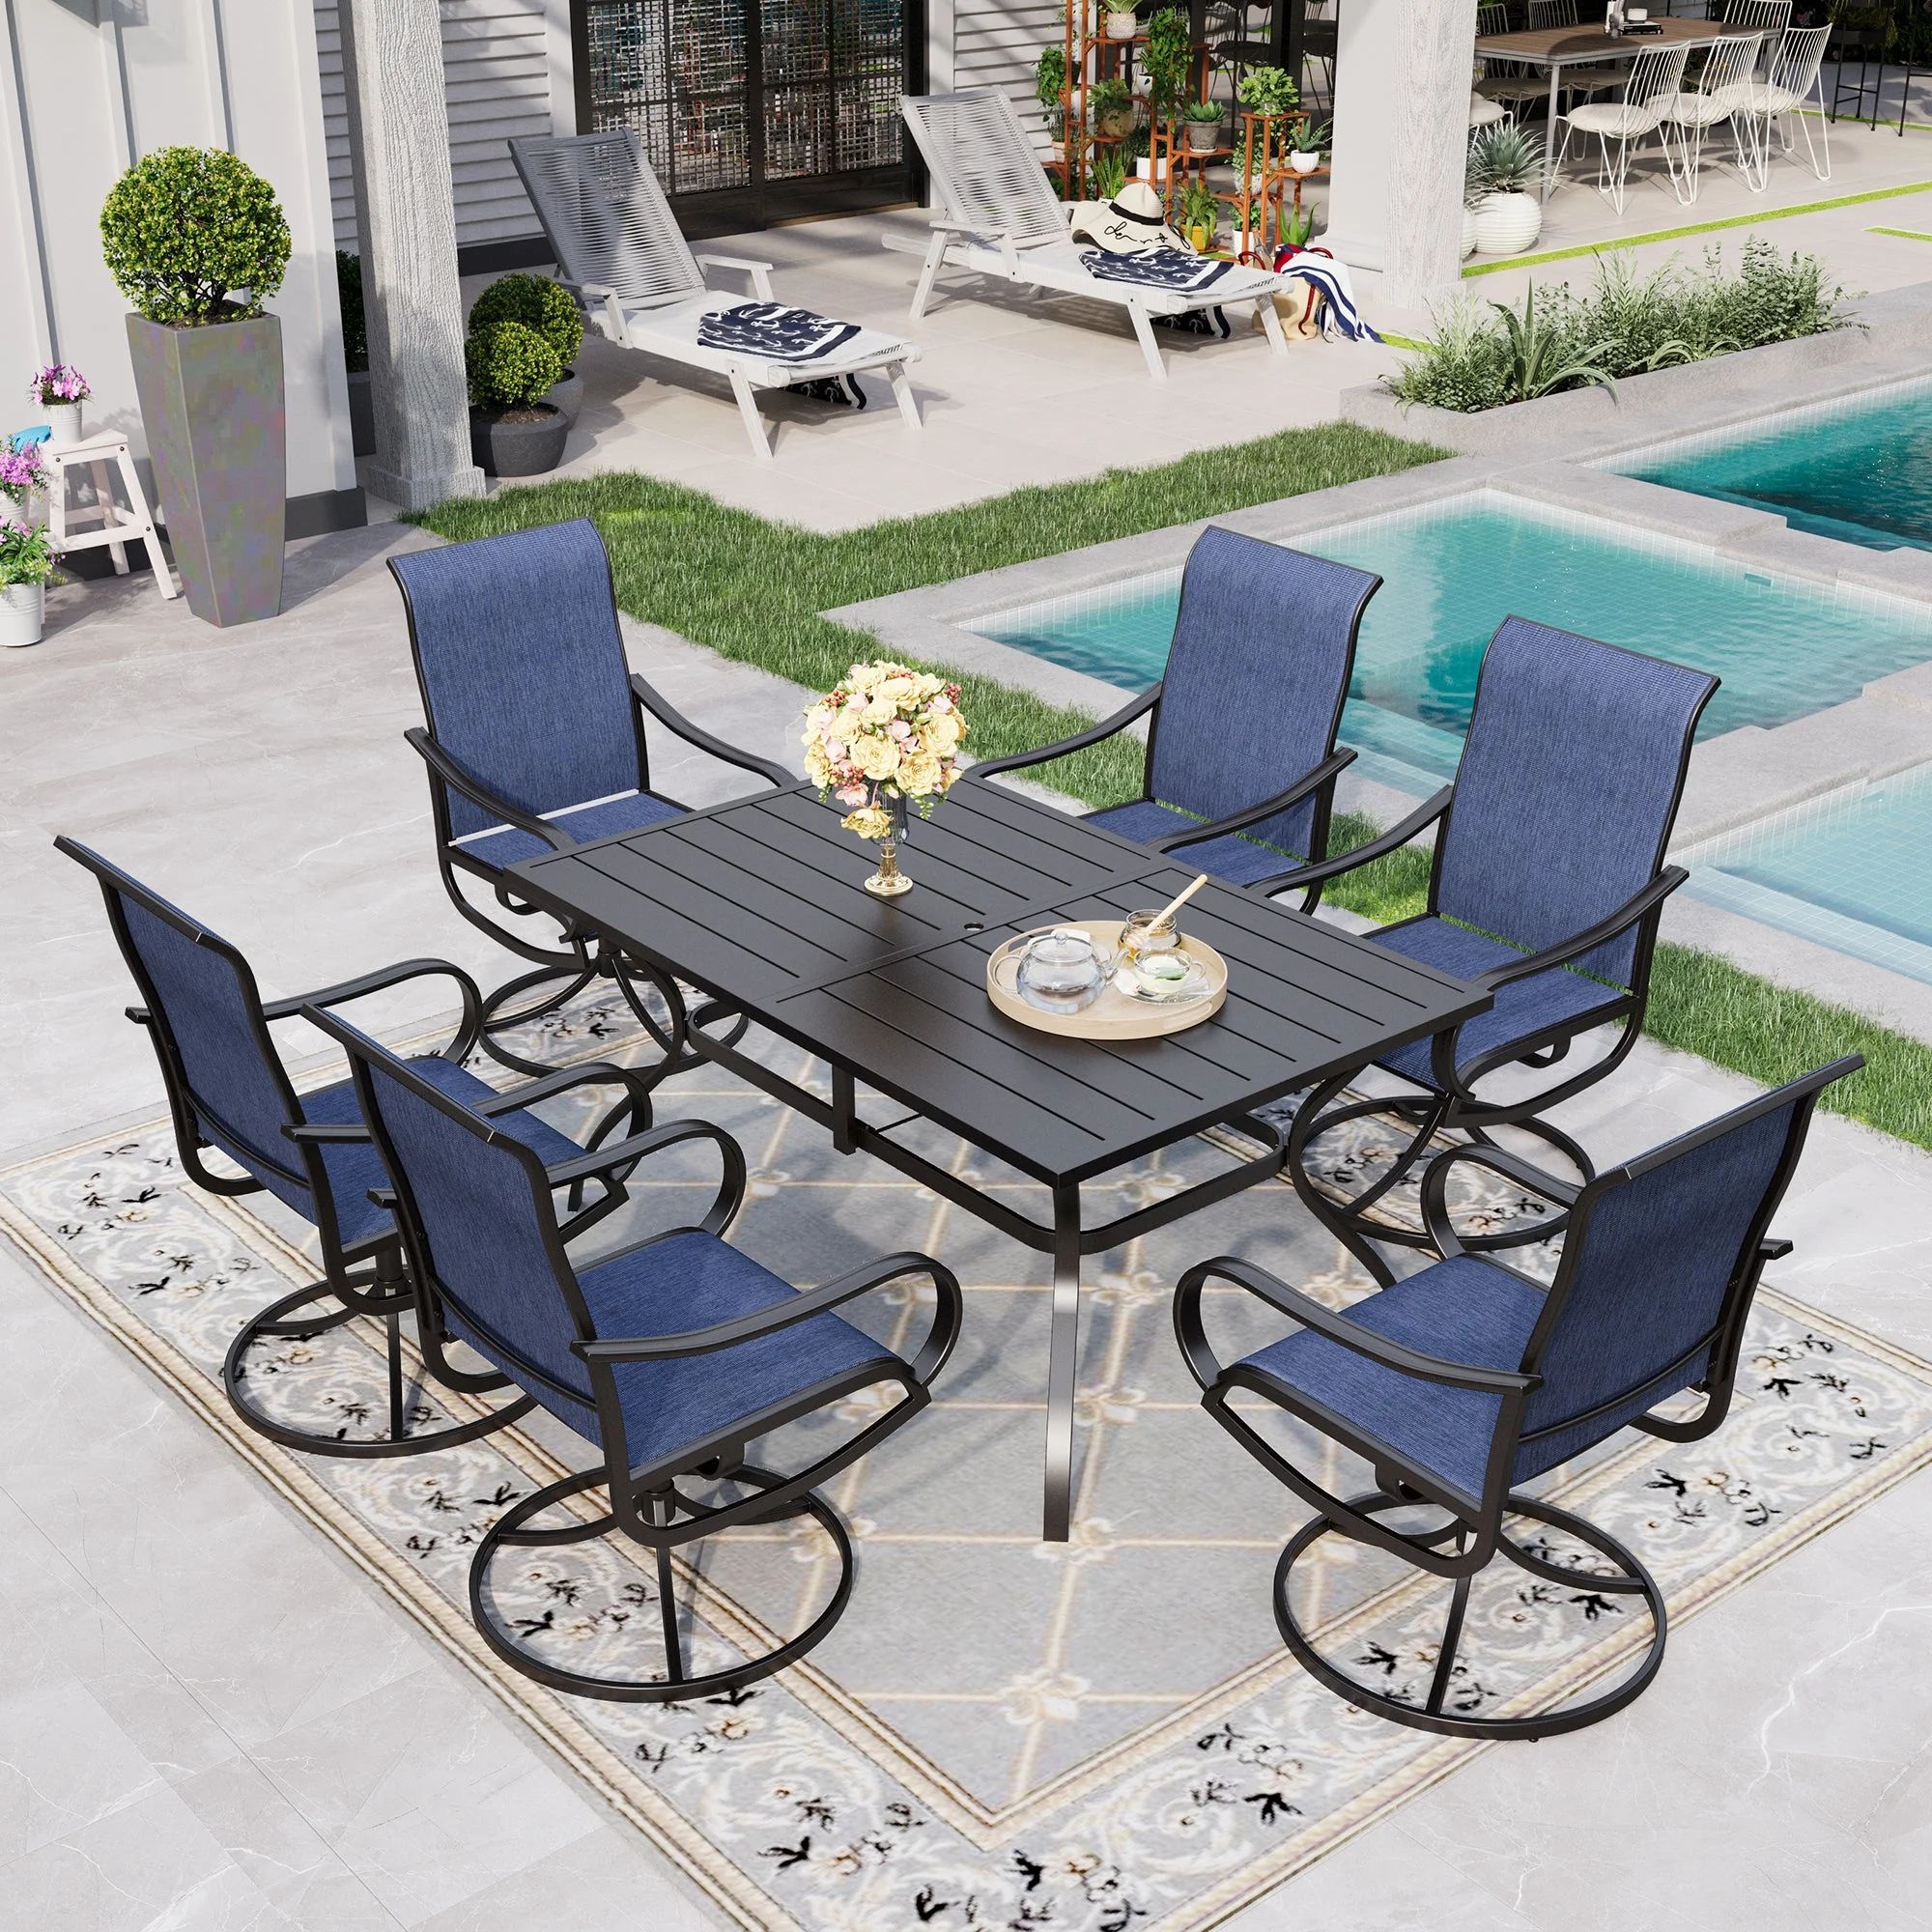 Sophia & William 7 Piece Outdoor Patio Dining Set Textilene Chairs and Table Furniture Set, Blue | Walmart (US)